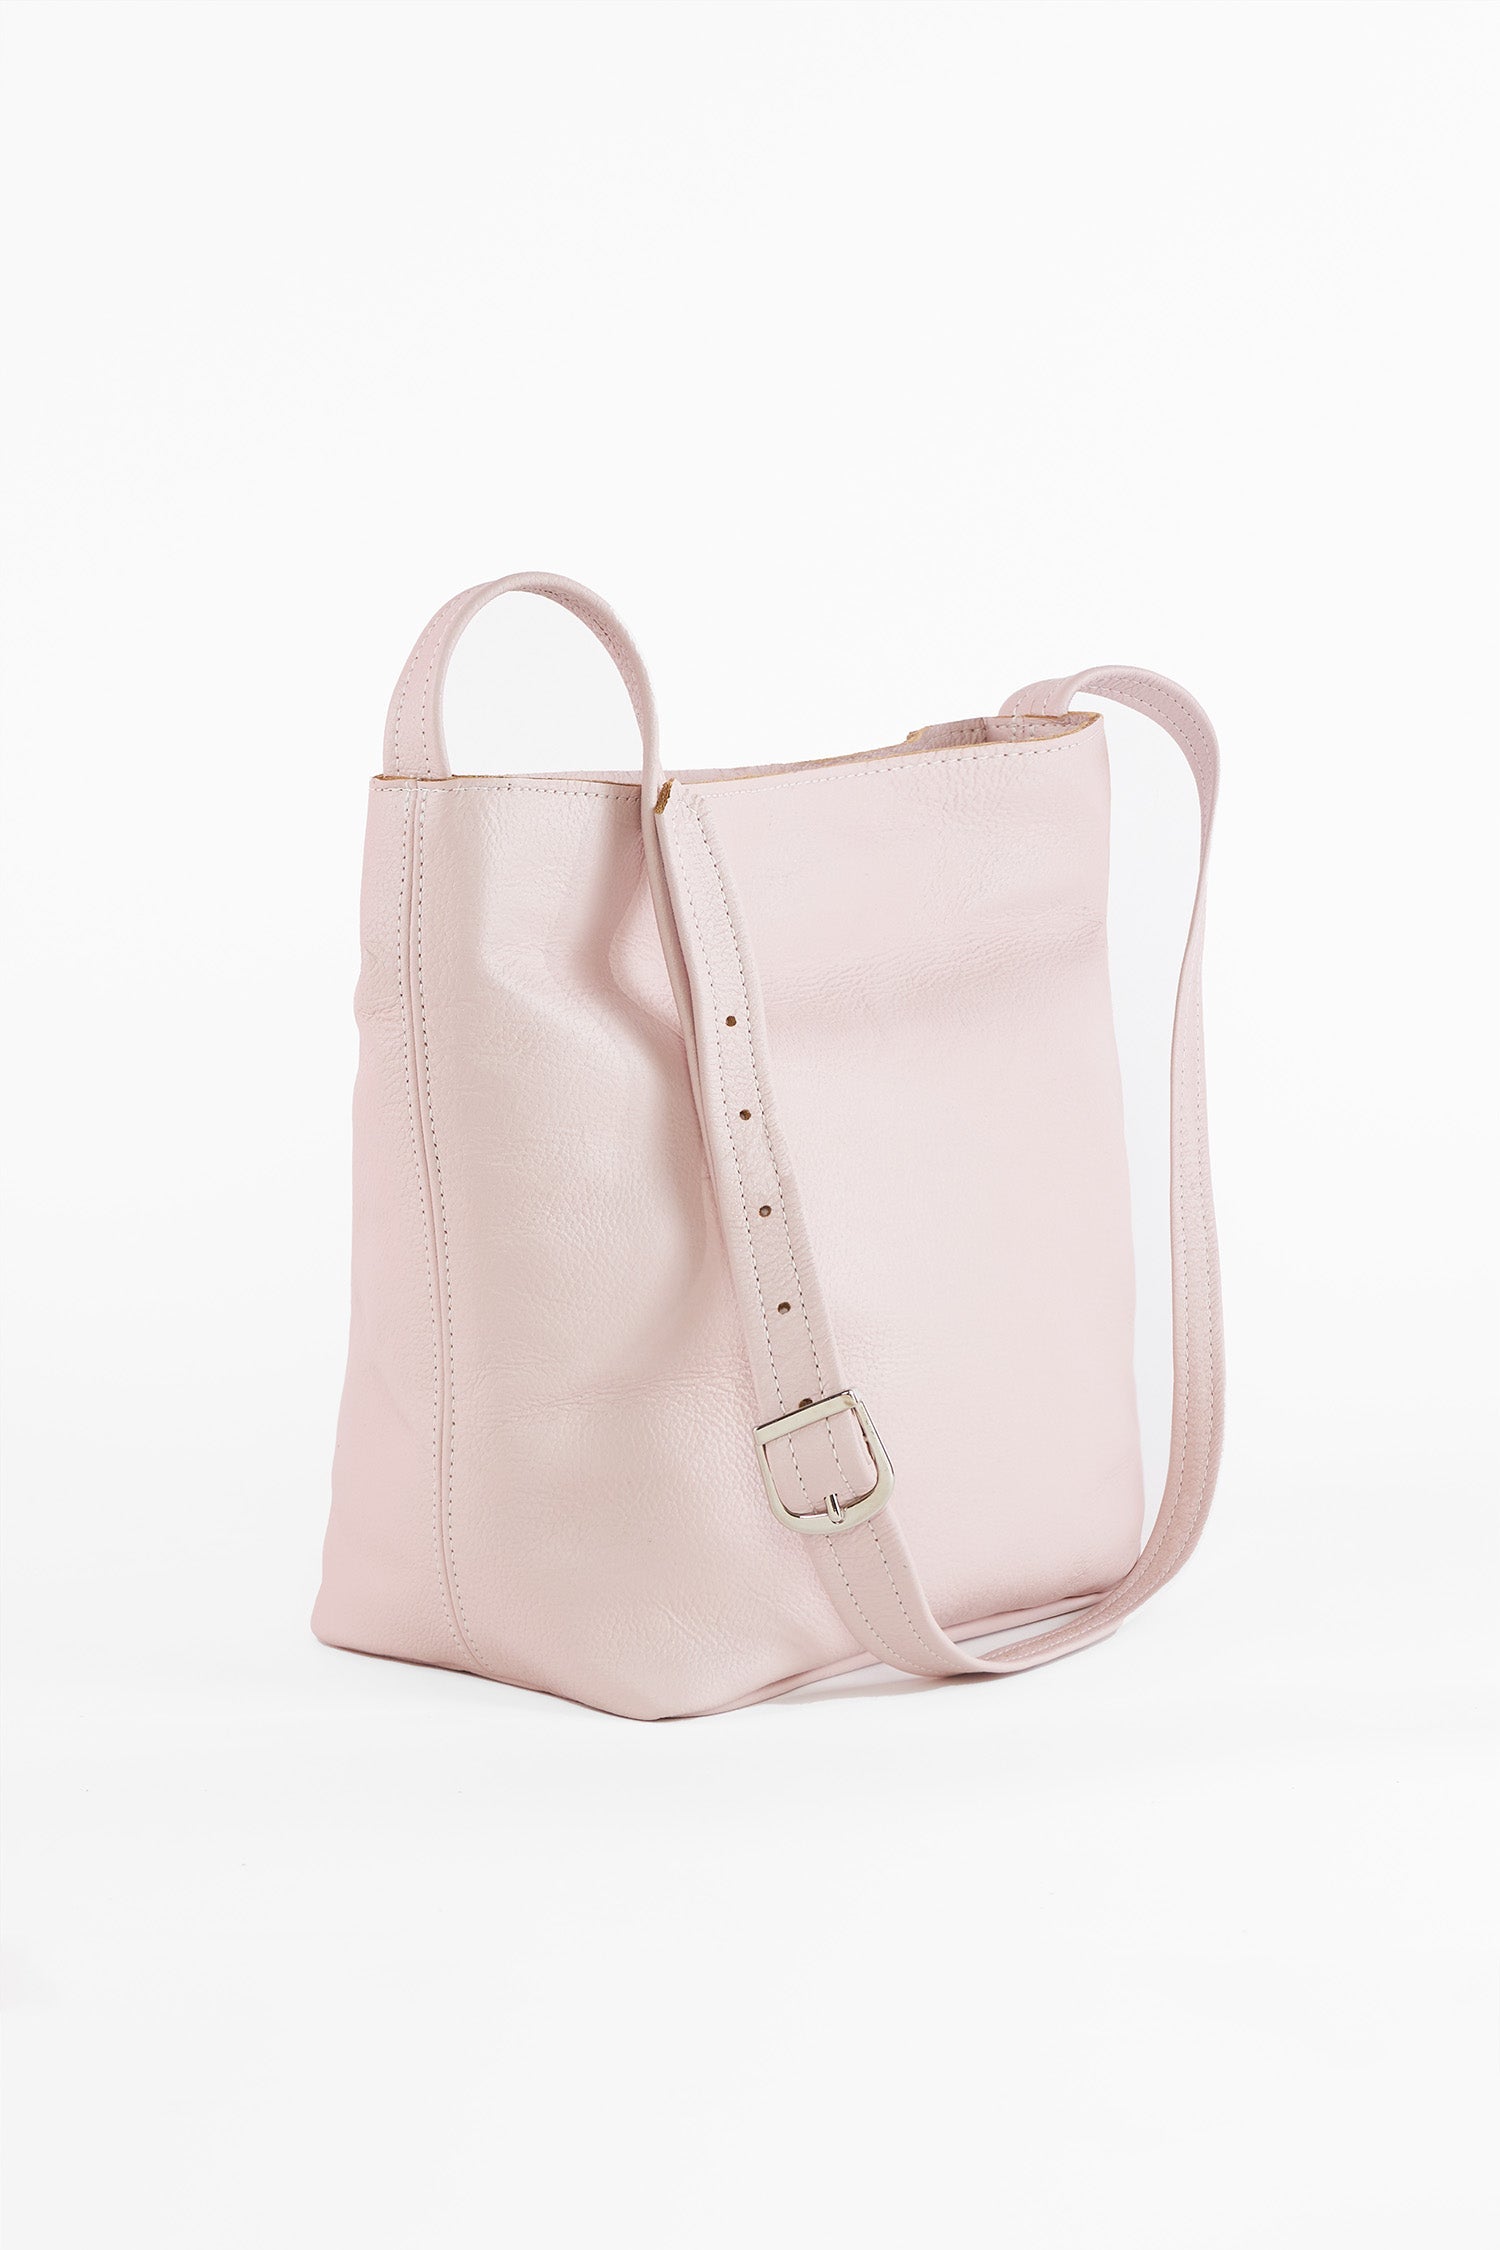 The Elevated Everyday Crossbody : OAD Mini Prism 